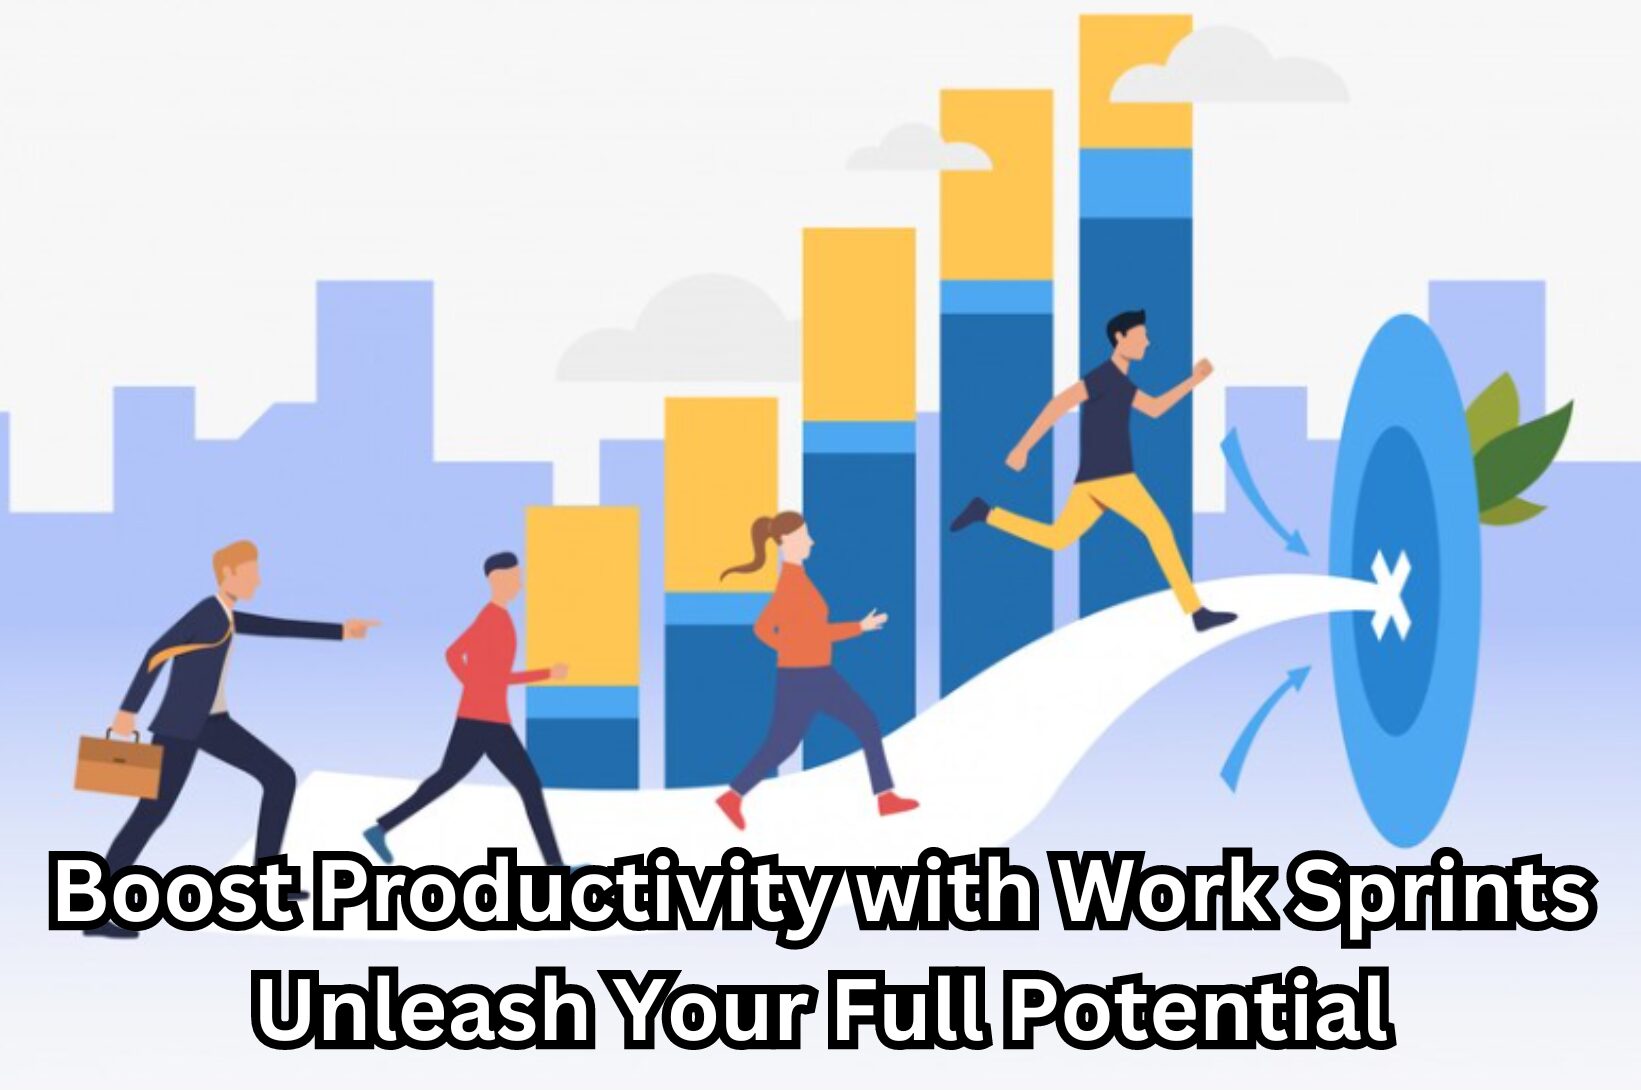 Efficient work sprint session - Boost Productivity with Work Sprints